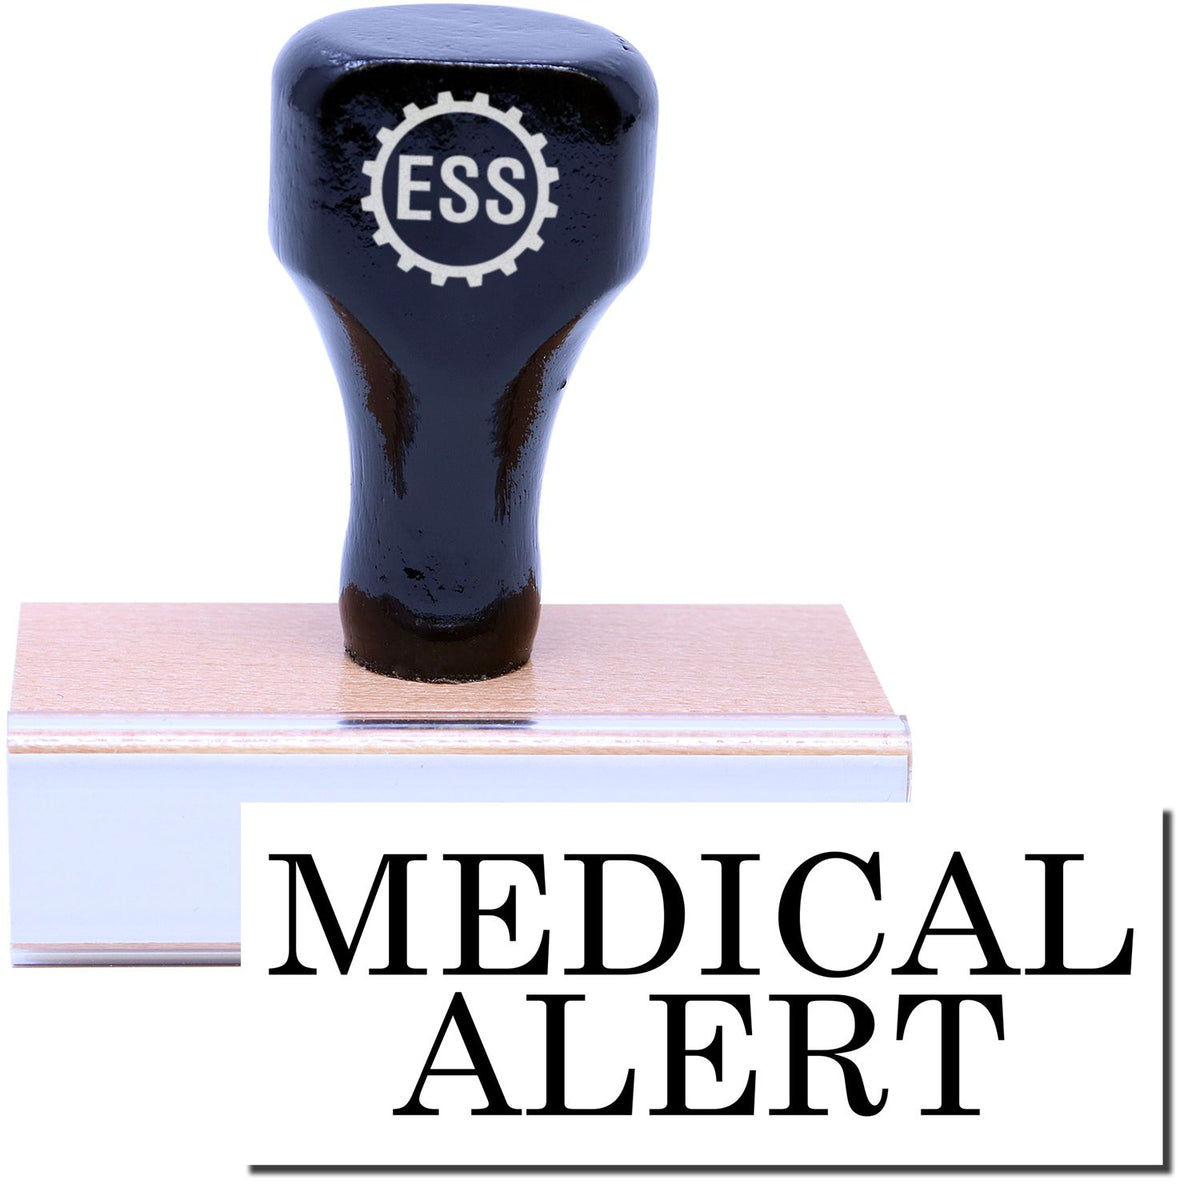 A stock office rubber stamp with a stamped image showing how the text &quot;MEDICAL ALERT&quot; is displayed after stamping.